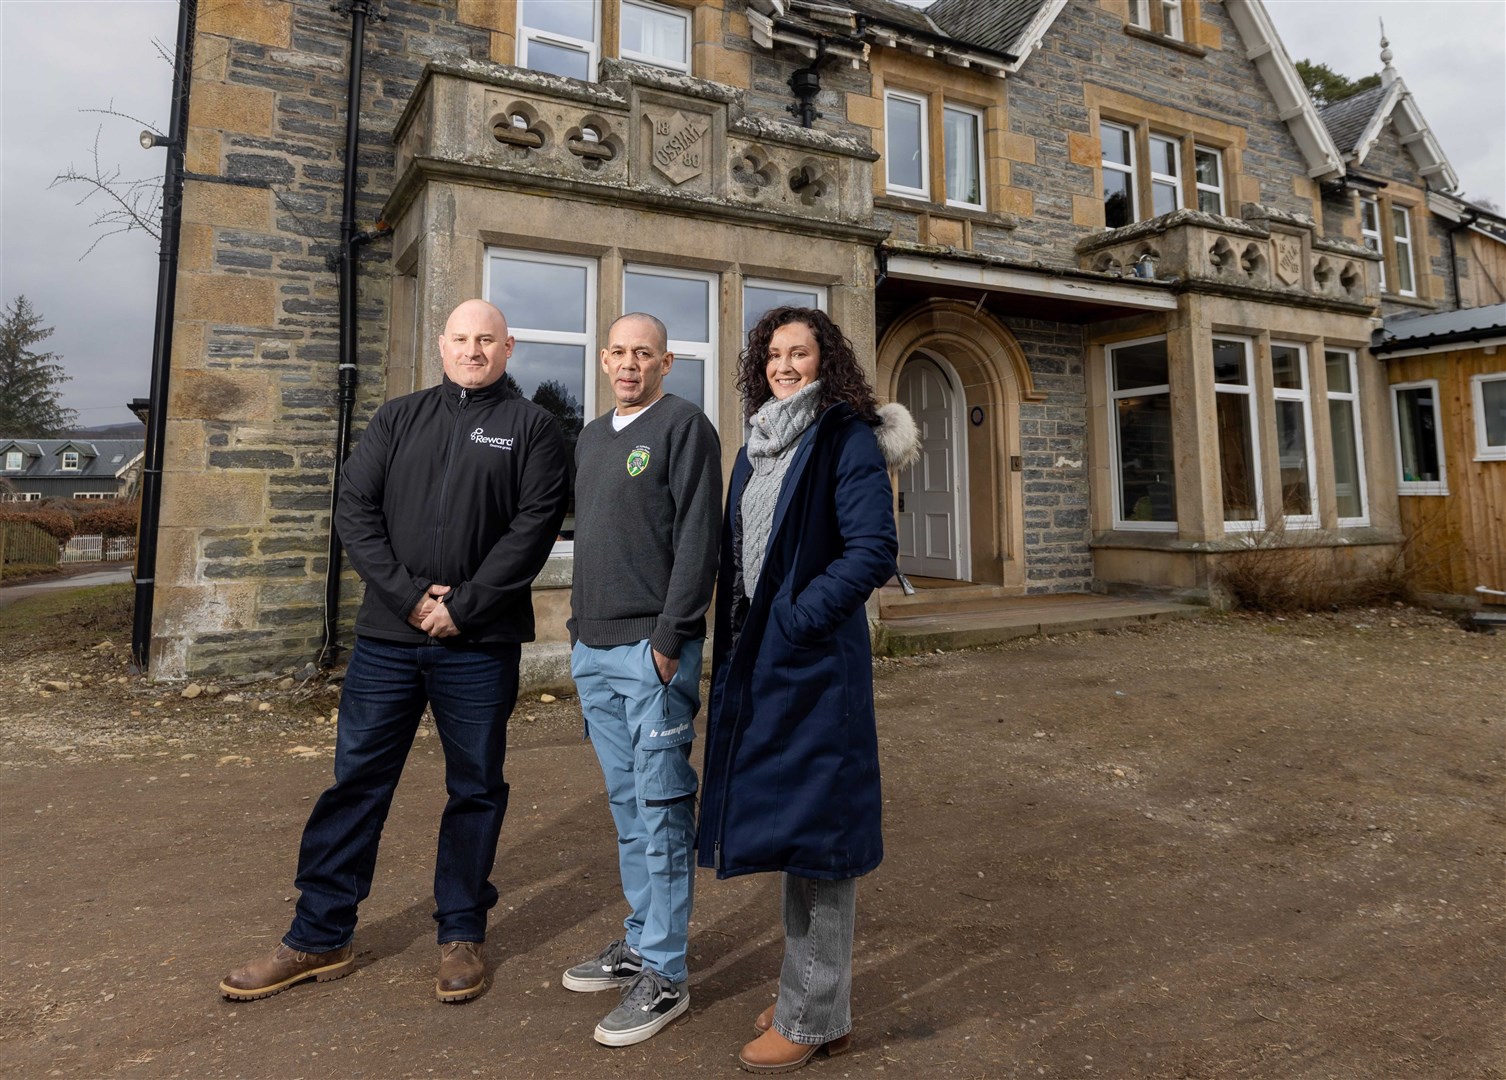 Brian Machray (Reward Finance Group), Tony Brown (Forces Manor) and Lucie Martin (Reward Finance Group) in front of Forces Manor in Kincraig.